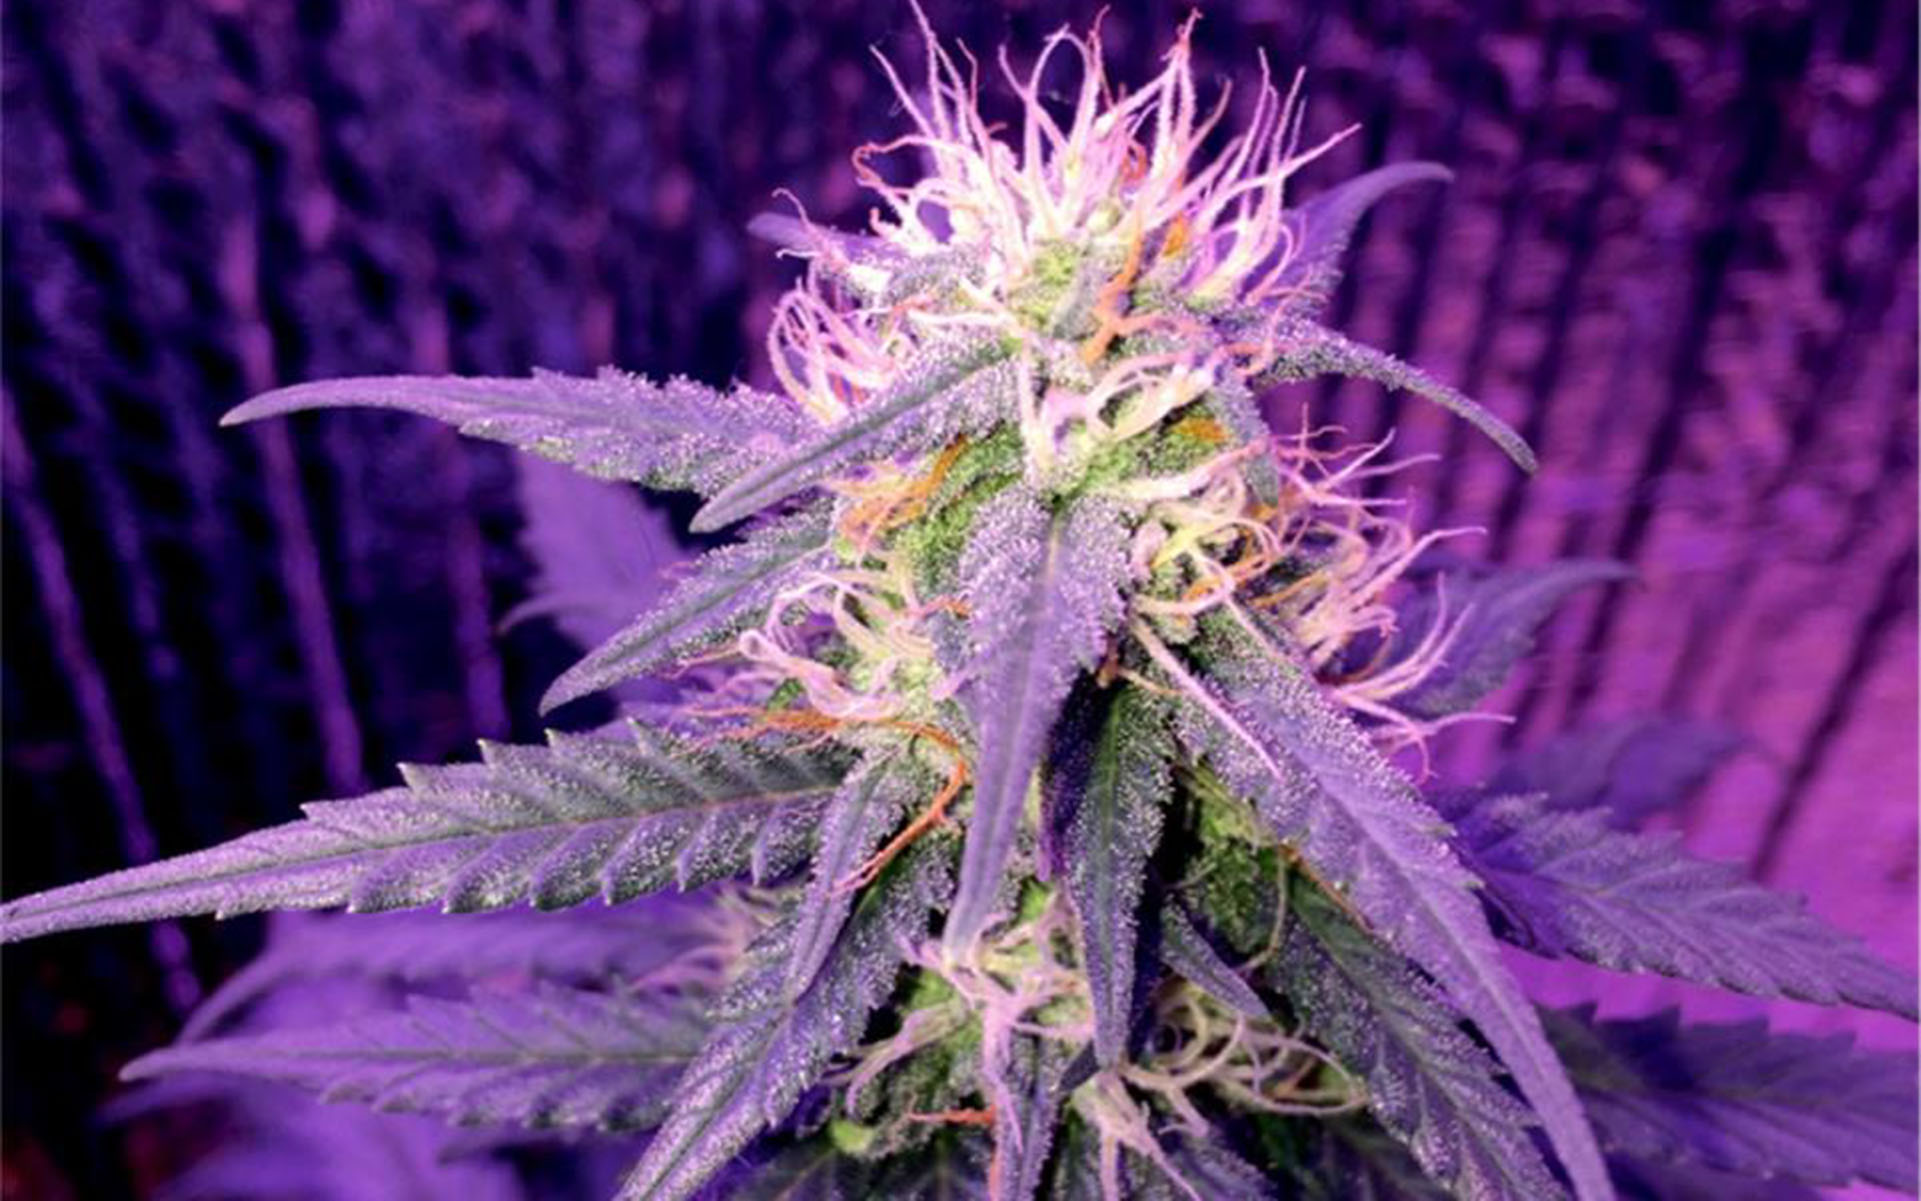 Learn more about growing the Sweet Tooth cannabis strain, including its flo...